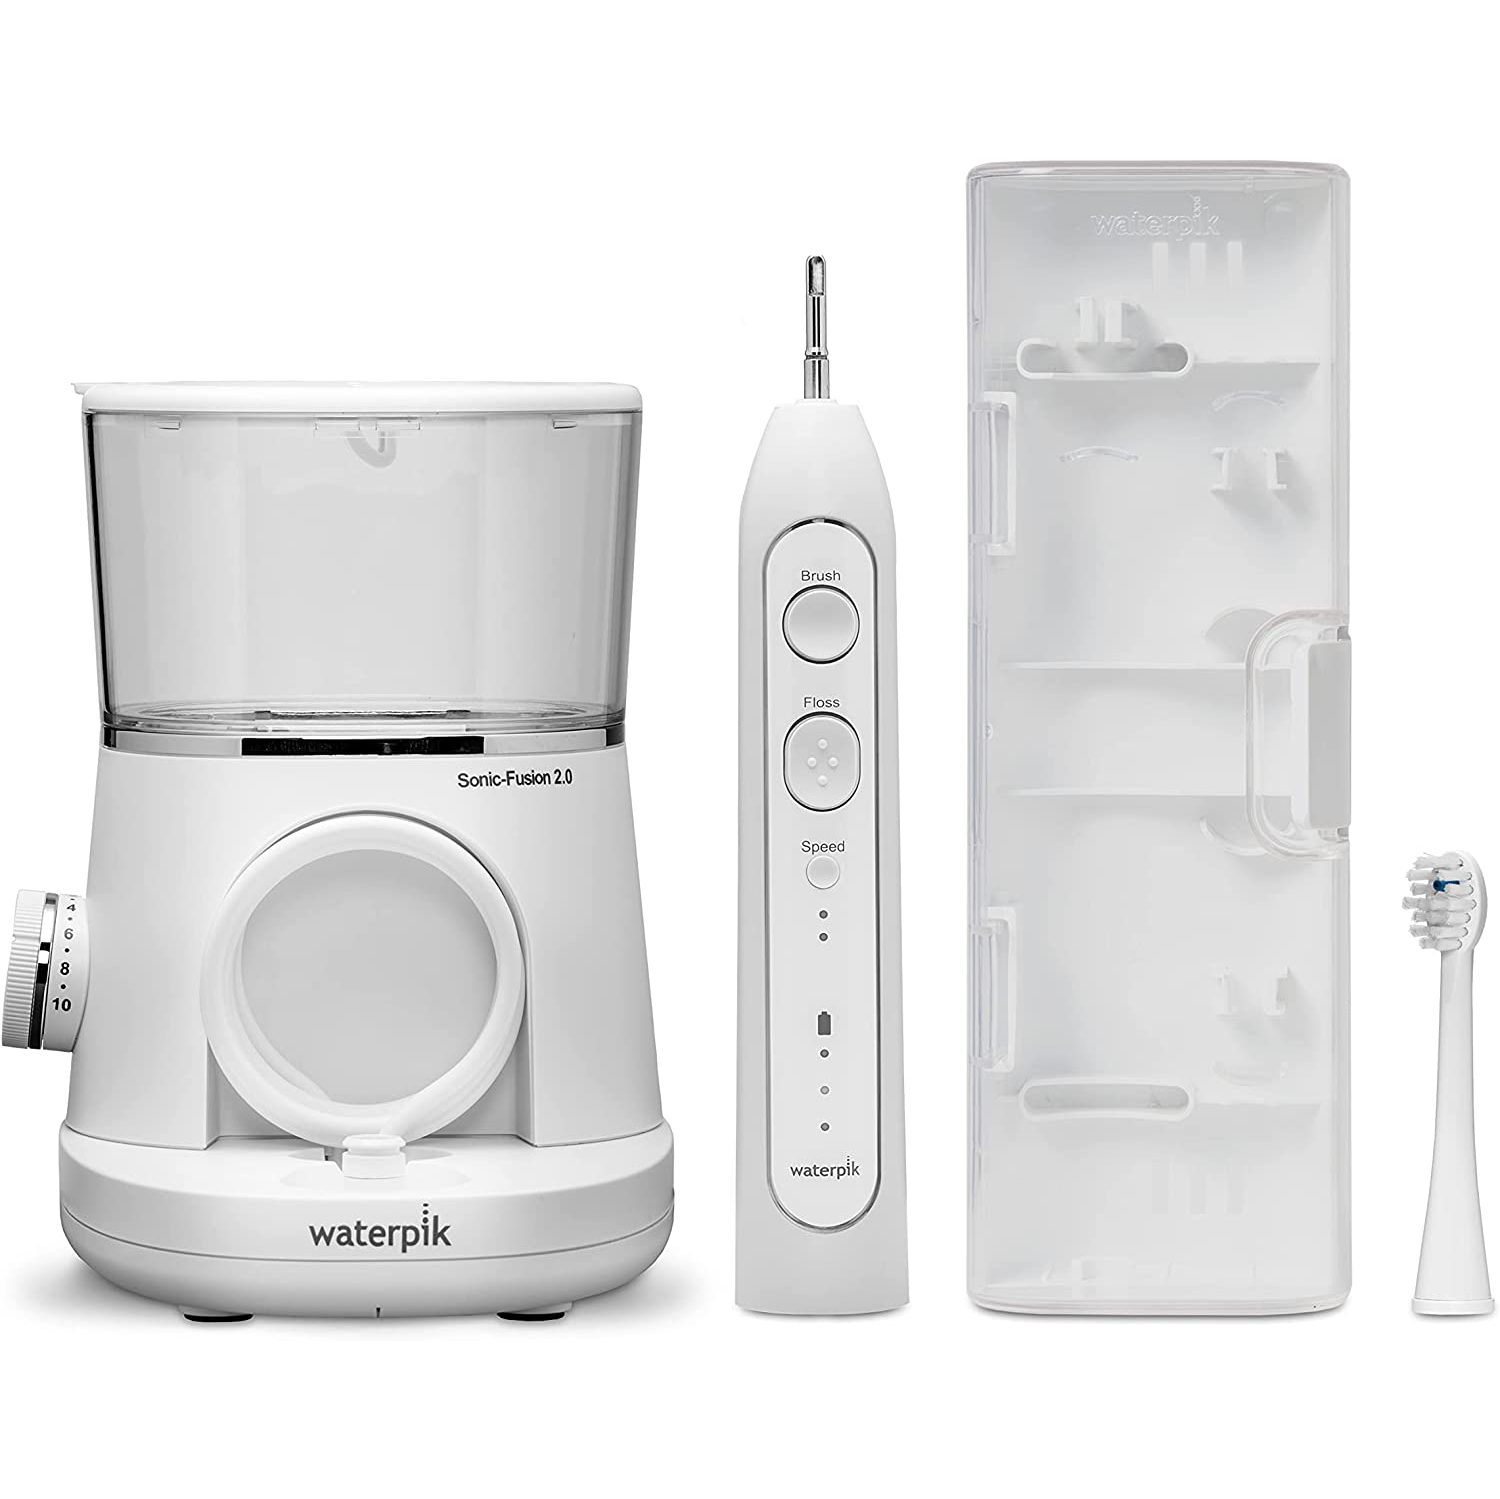 Waterpik Sonic-Fusion 2.0 Flossing Electric Toothbrush, White - Open Box